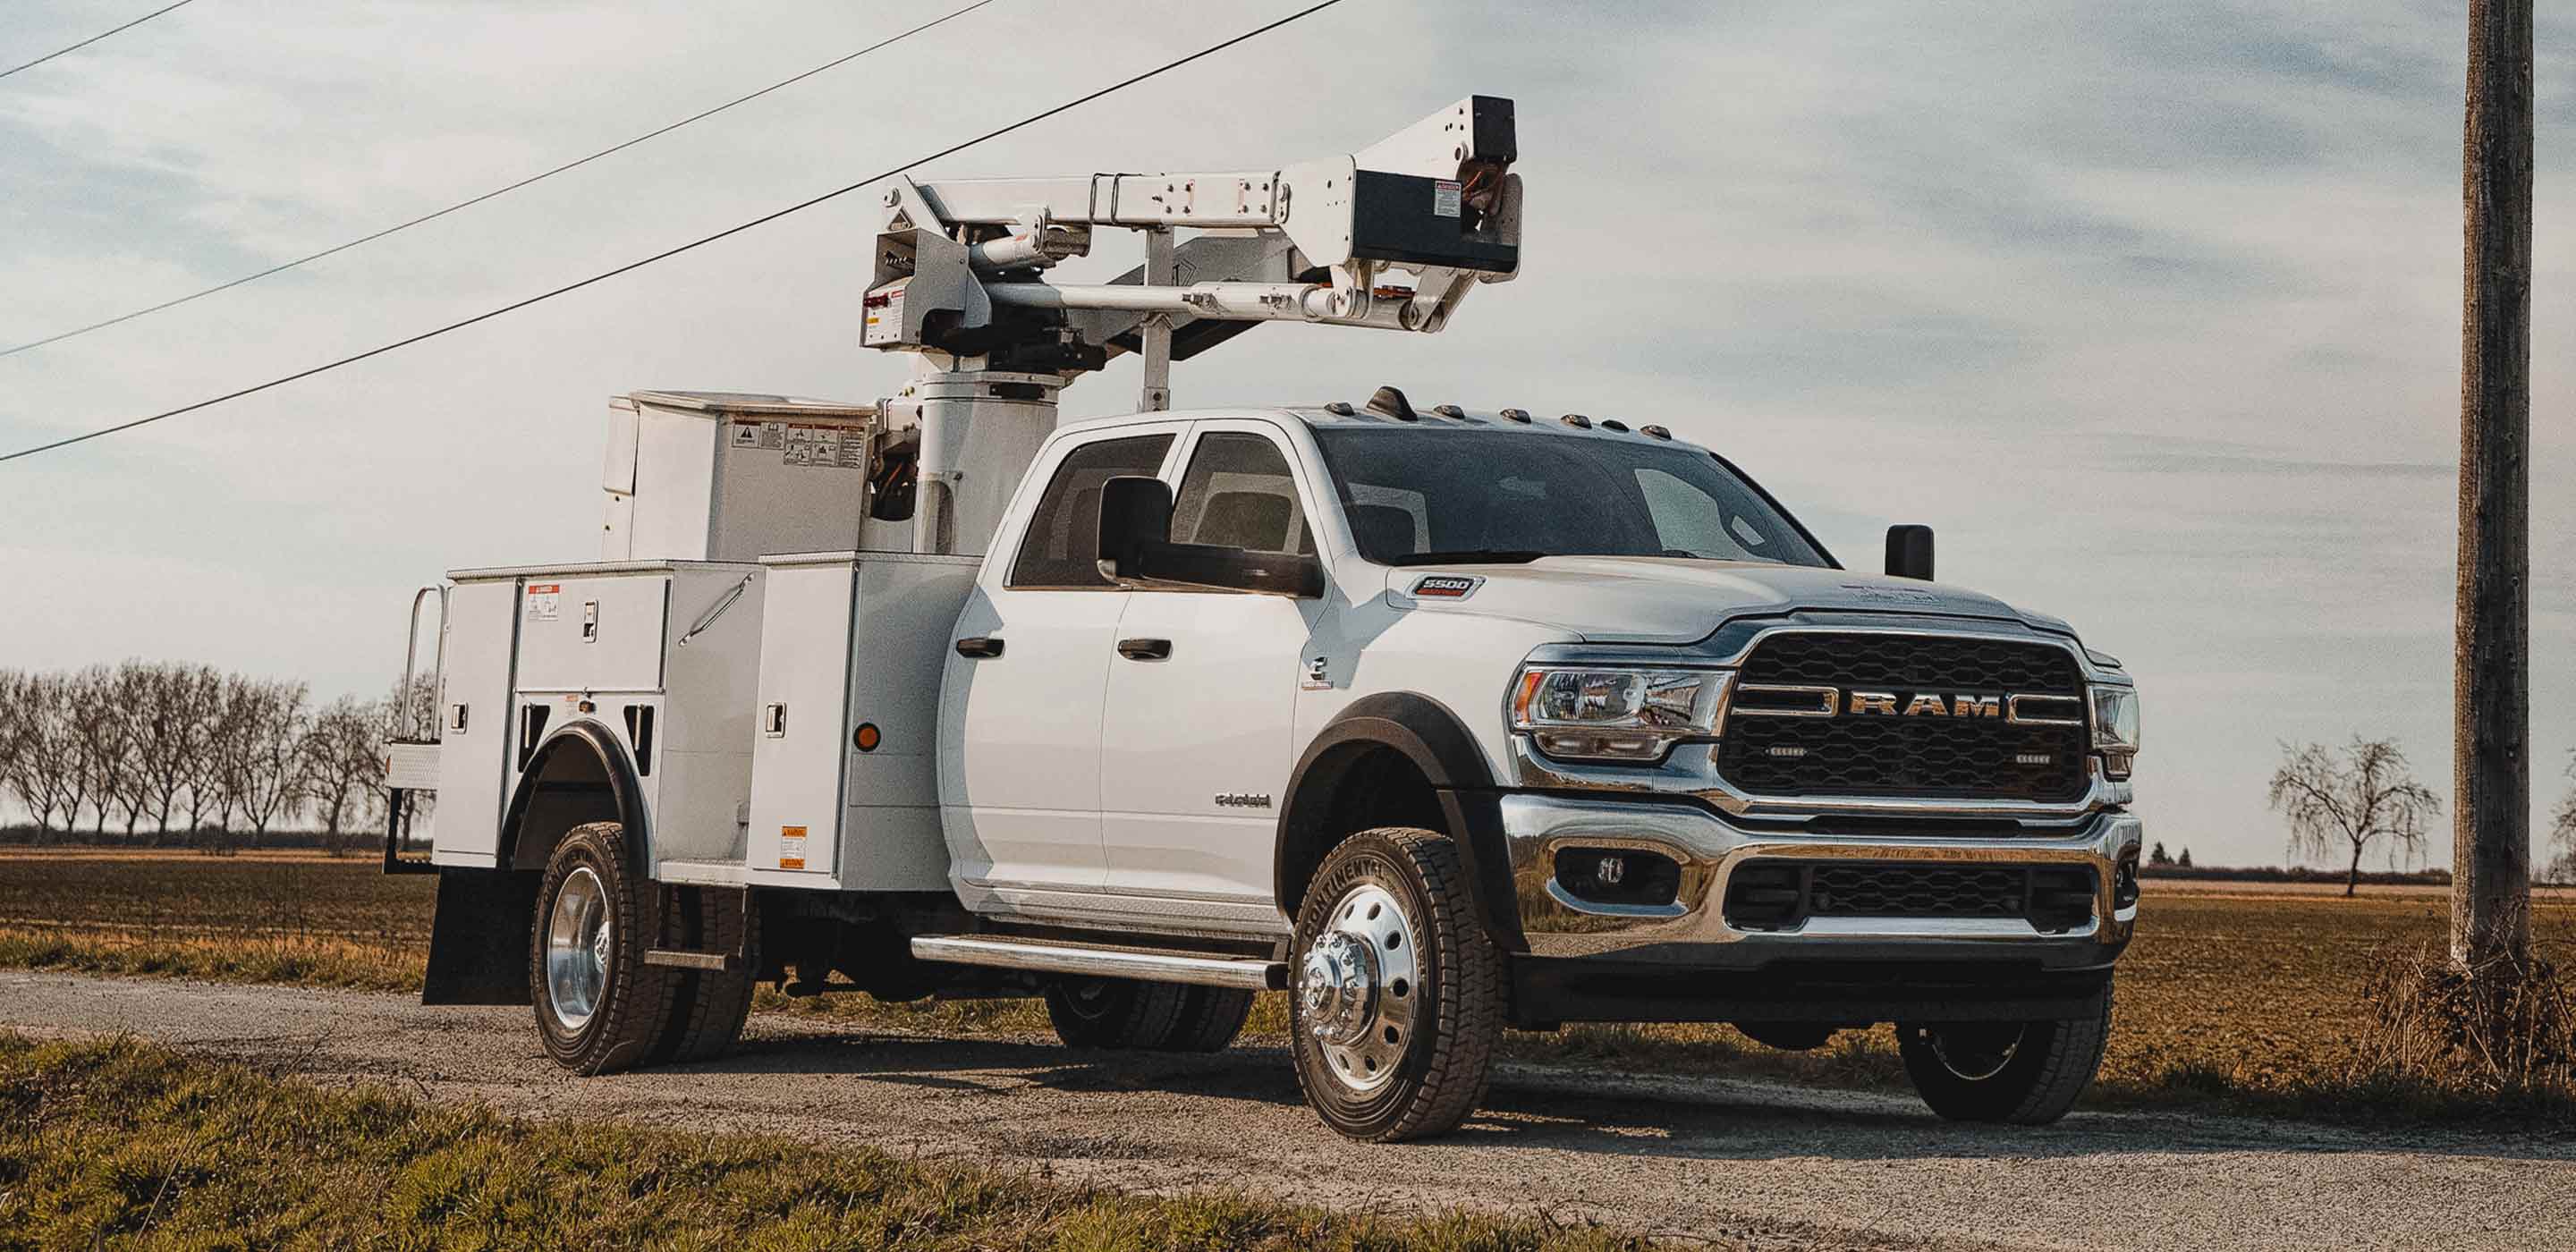 Display The 2022 Ram Chassis Cab with a crane upfit.